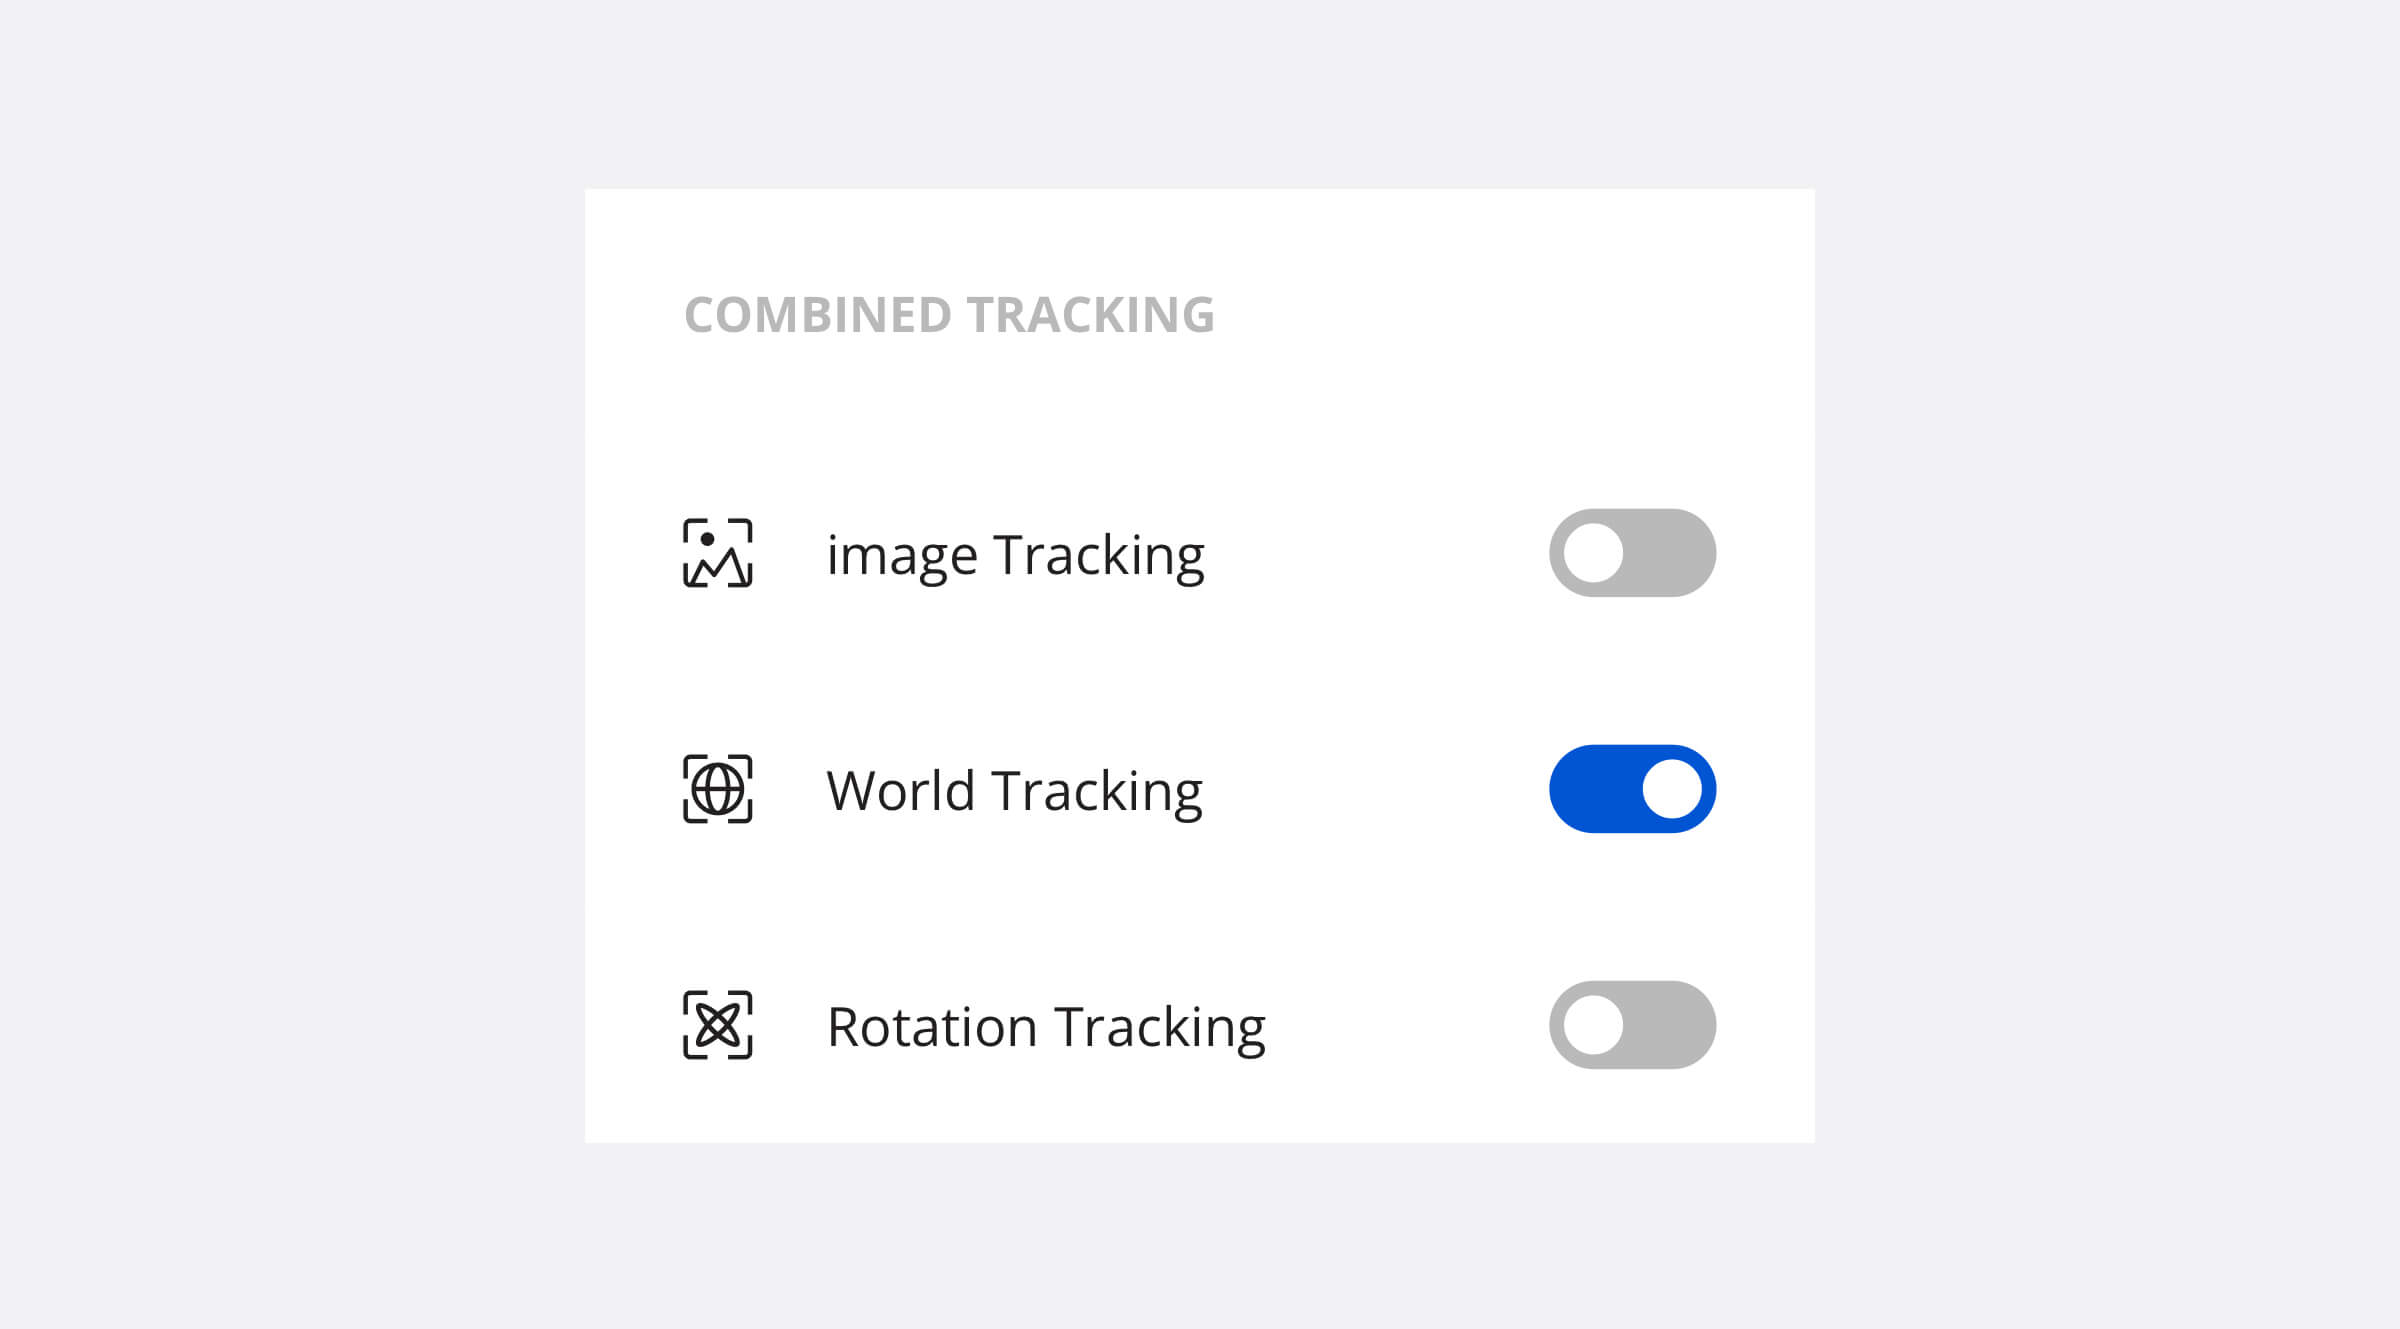 Combinedtracking